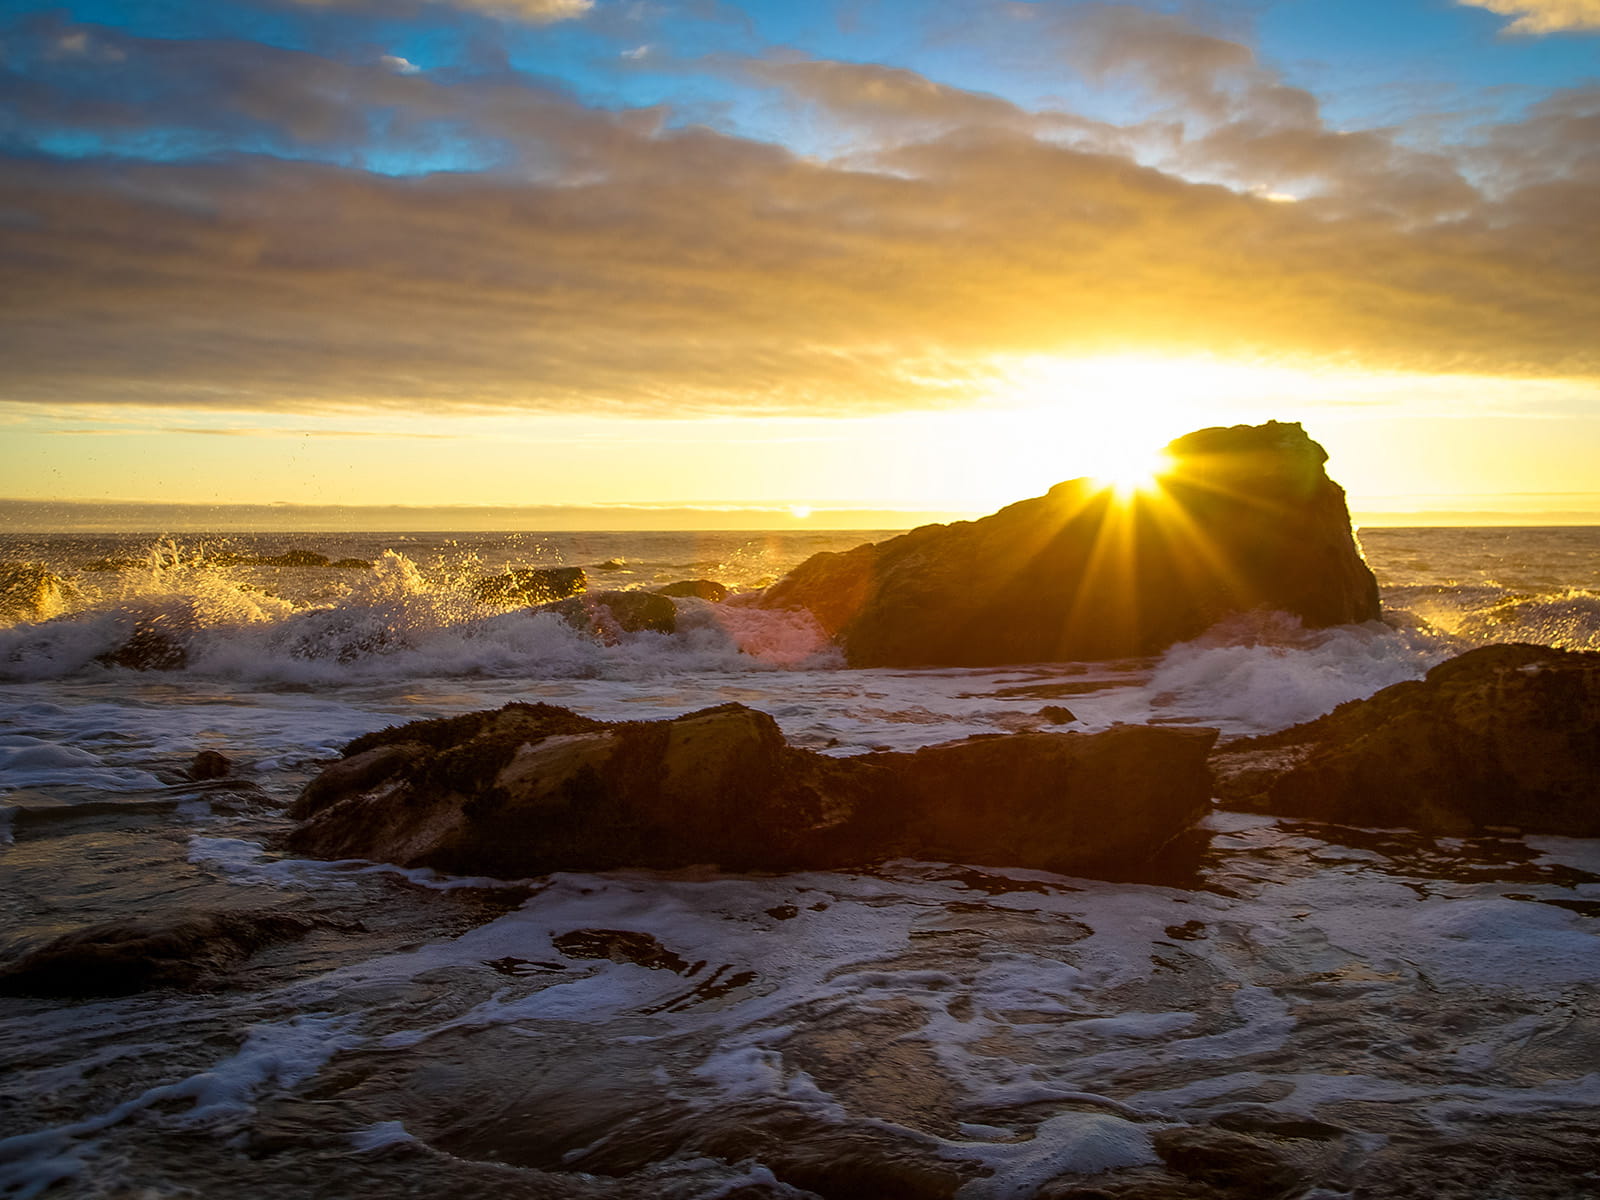 sunseting in the distance while waves crash over rocks along the beach